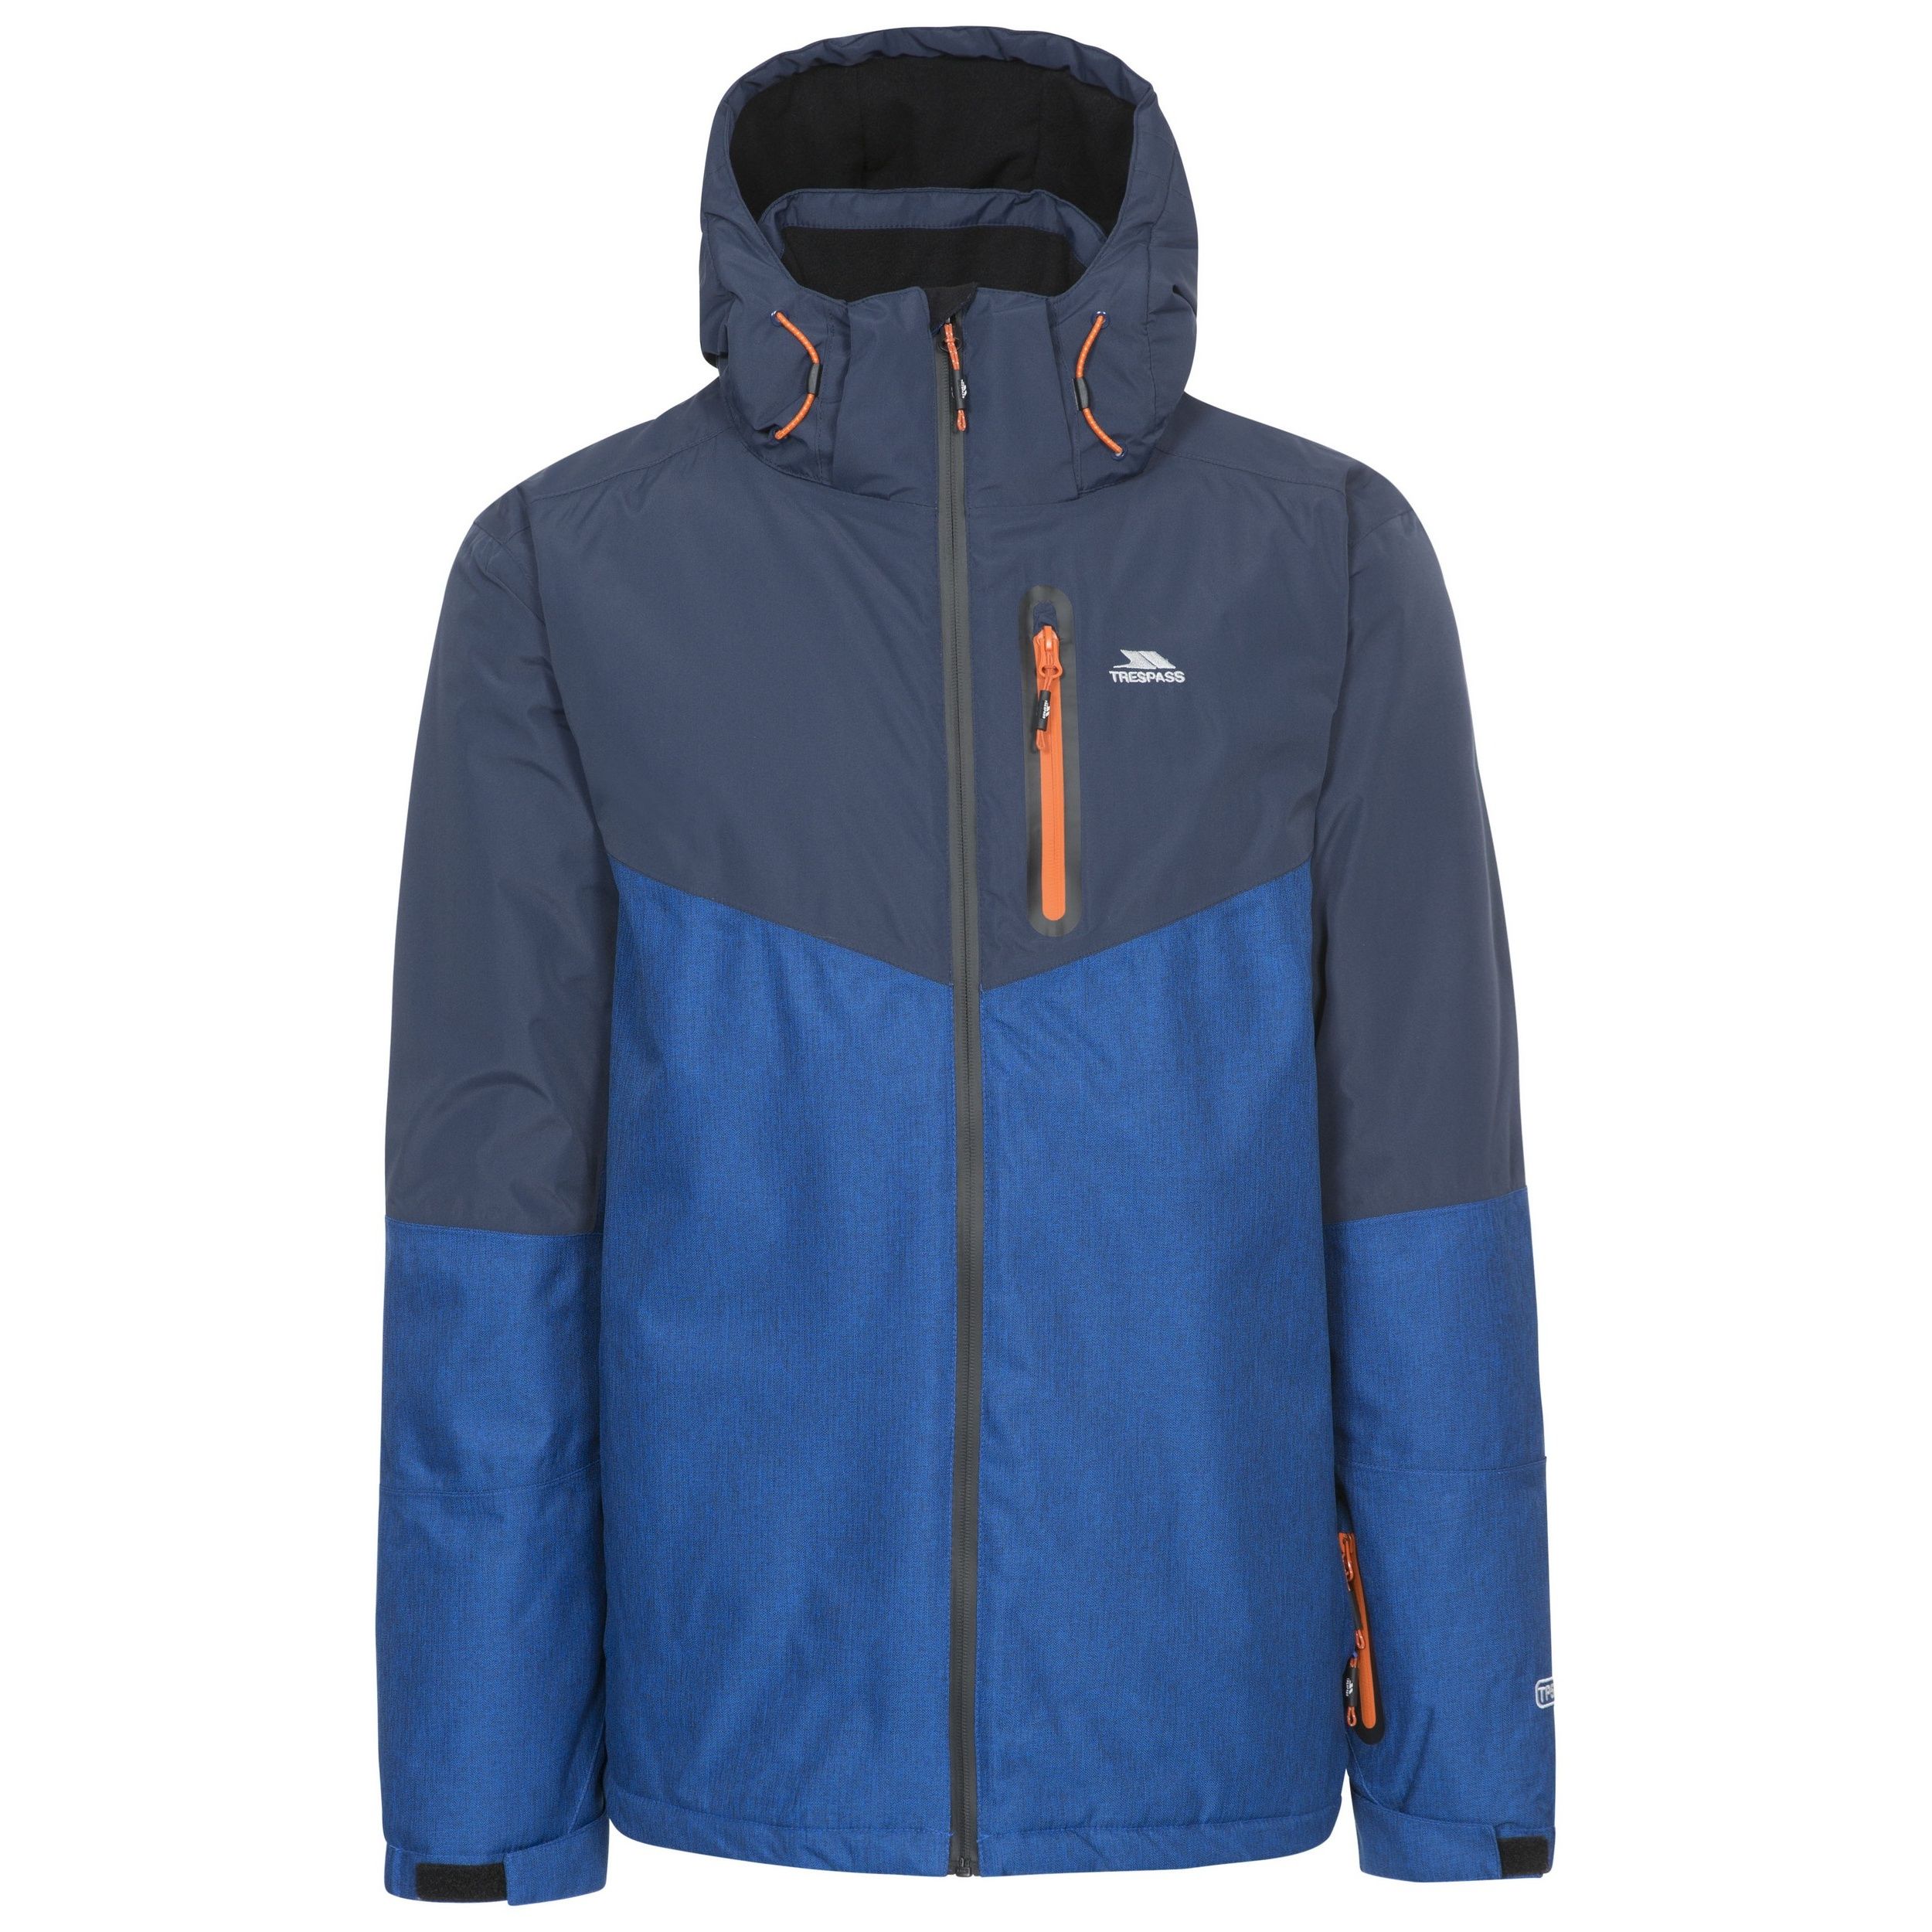 A great jacket that will give you the coverage you need on the slopes, the Bear mens ski jacket is suitable for both skiing and snowboarding. Padded & waterproof up to 5000mm. Upper body tricot lining. Adjustable zip off hood. Material: Shell: 100% Polyester TPU Membrane. Lining: 100% Polyester. Filling: 100% Polyester. Trespass Mens Chest Sizing (approx): S - 35-37in/89-94cm, M - 38-40in/96.5-101.5cm, L - 41-43in/104-109cm, XL - 44-46in/111.5-117cm, XXL - 46-48in/117-122cm, 3XL - 48-50in/122-127cm.